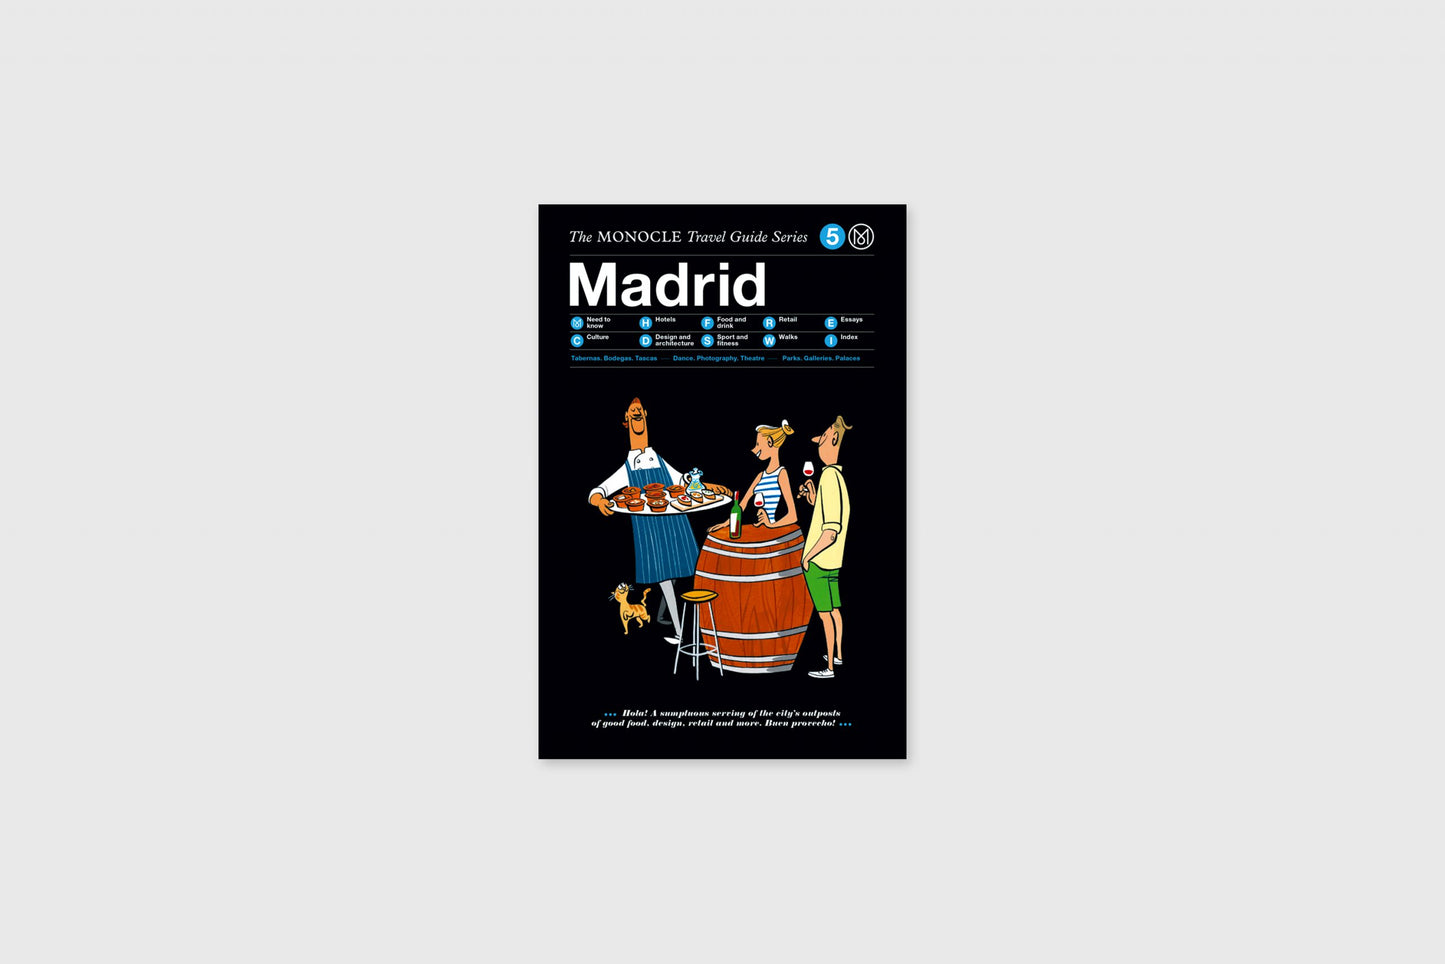 Madrid: The Monocle Travel Guide Series